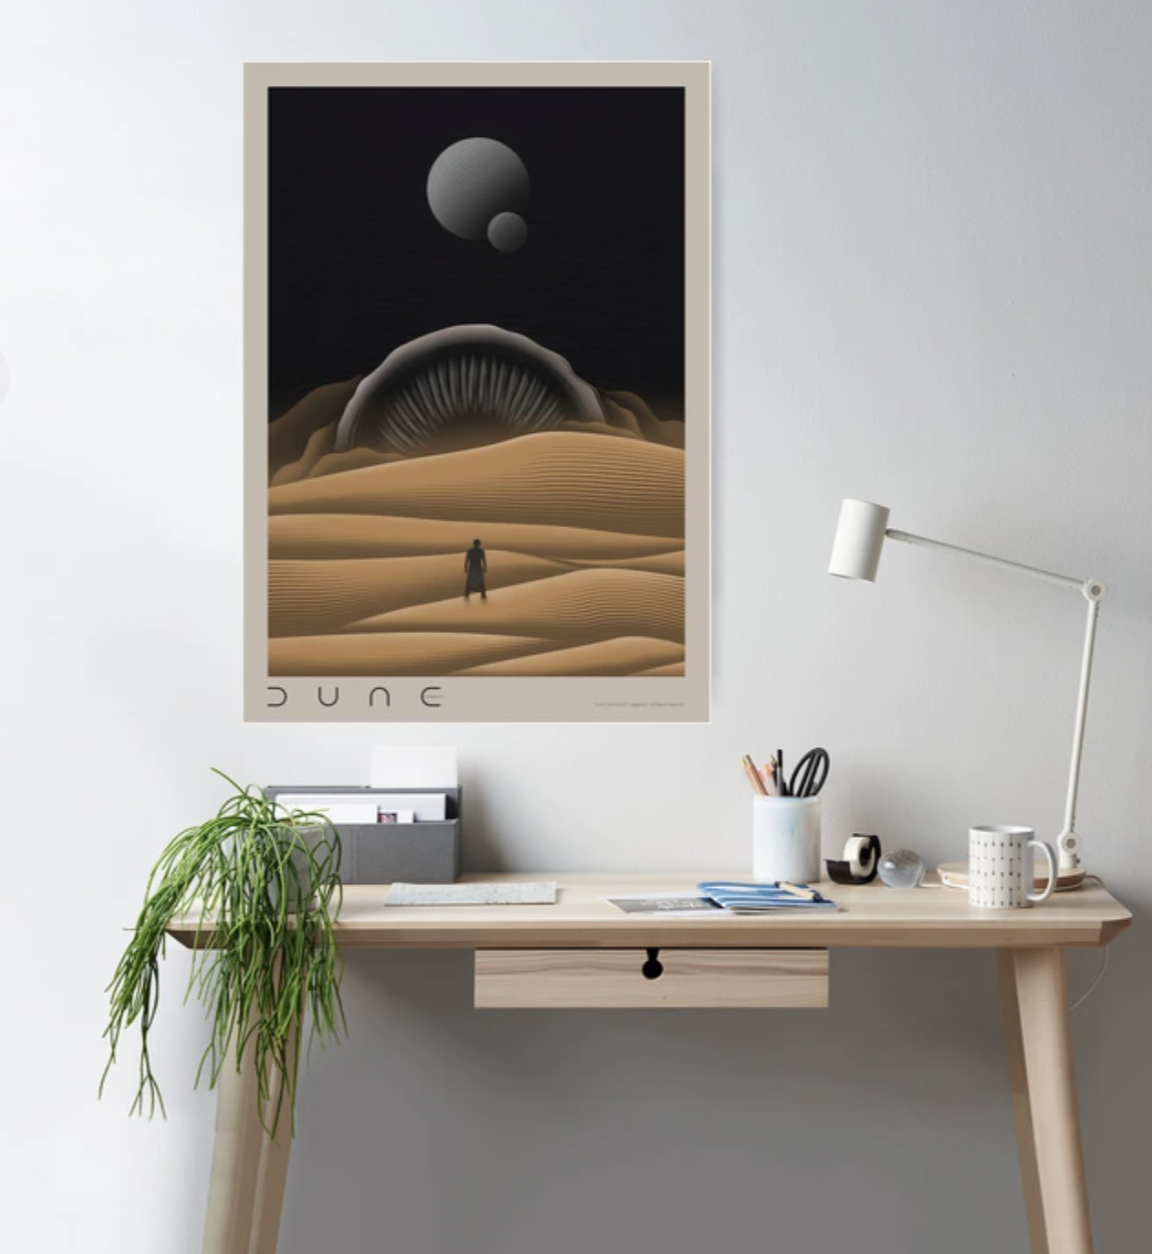 Poster of &quot;Dune&quot; film with minimalist desert scene and figure, hung above a tidy desk setup